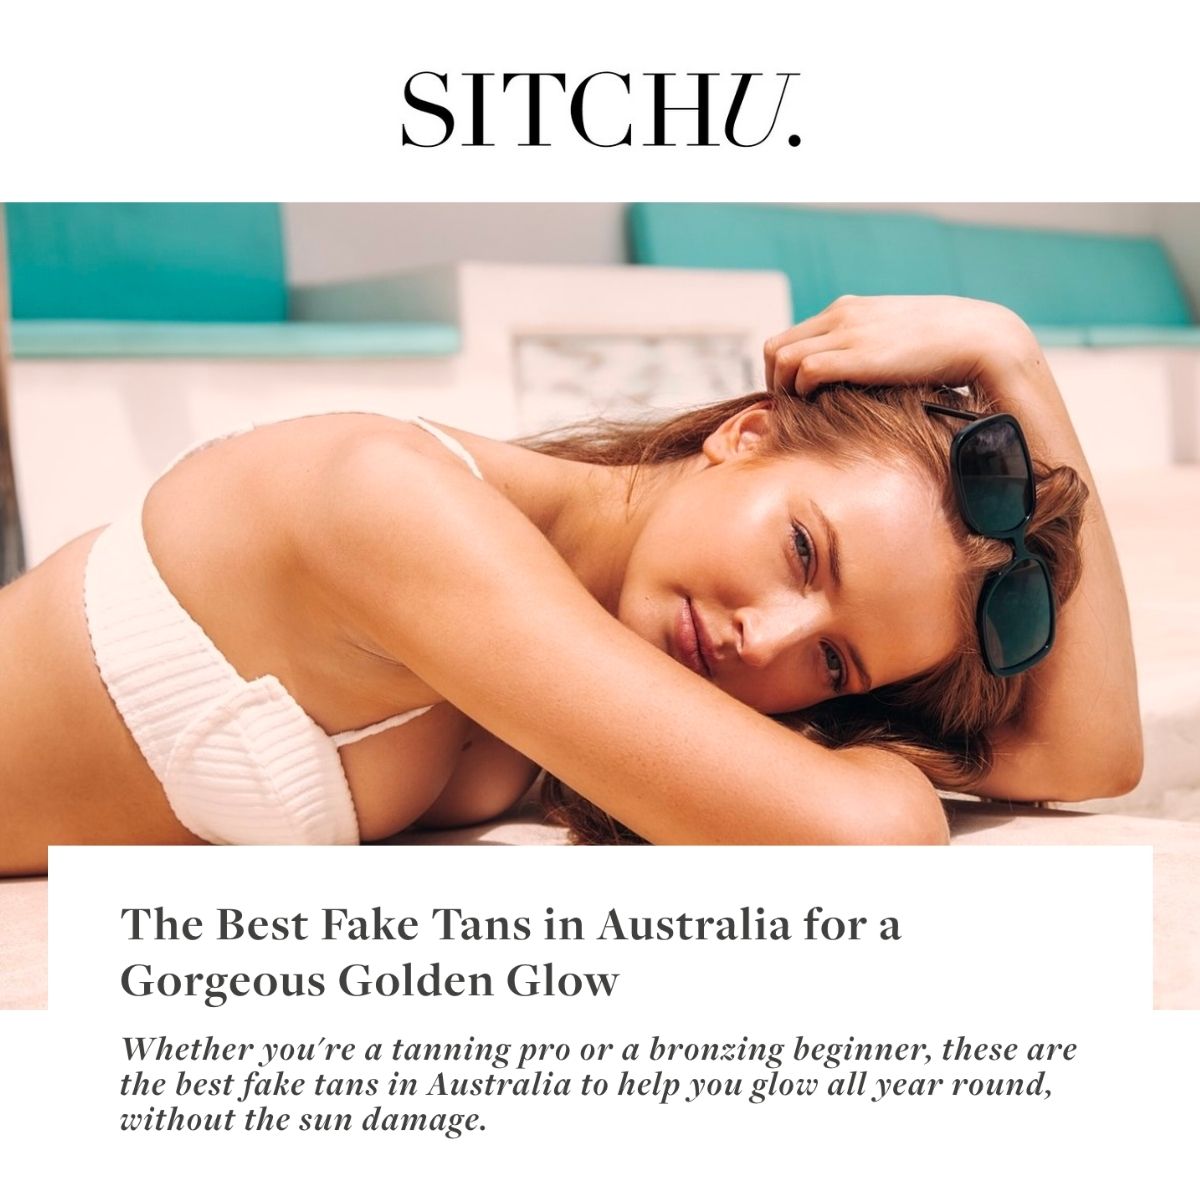 The Best Fake Tans in Australia for a Gorgeous Golden Glow